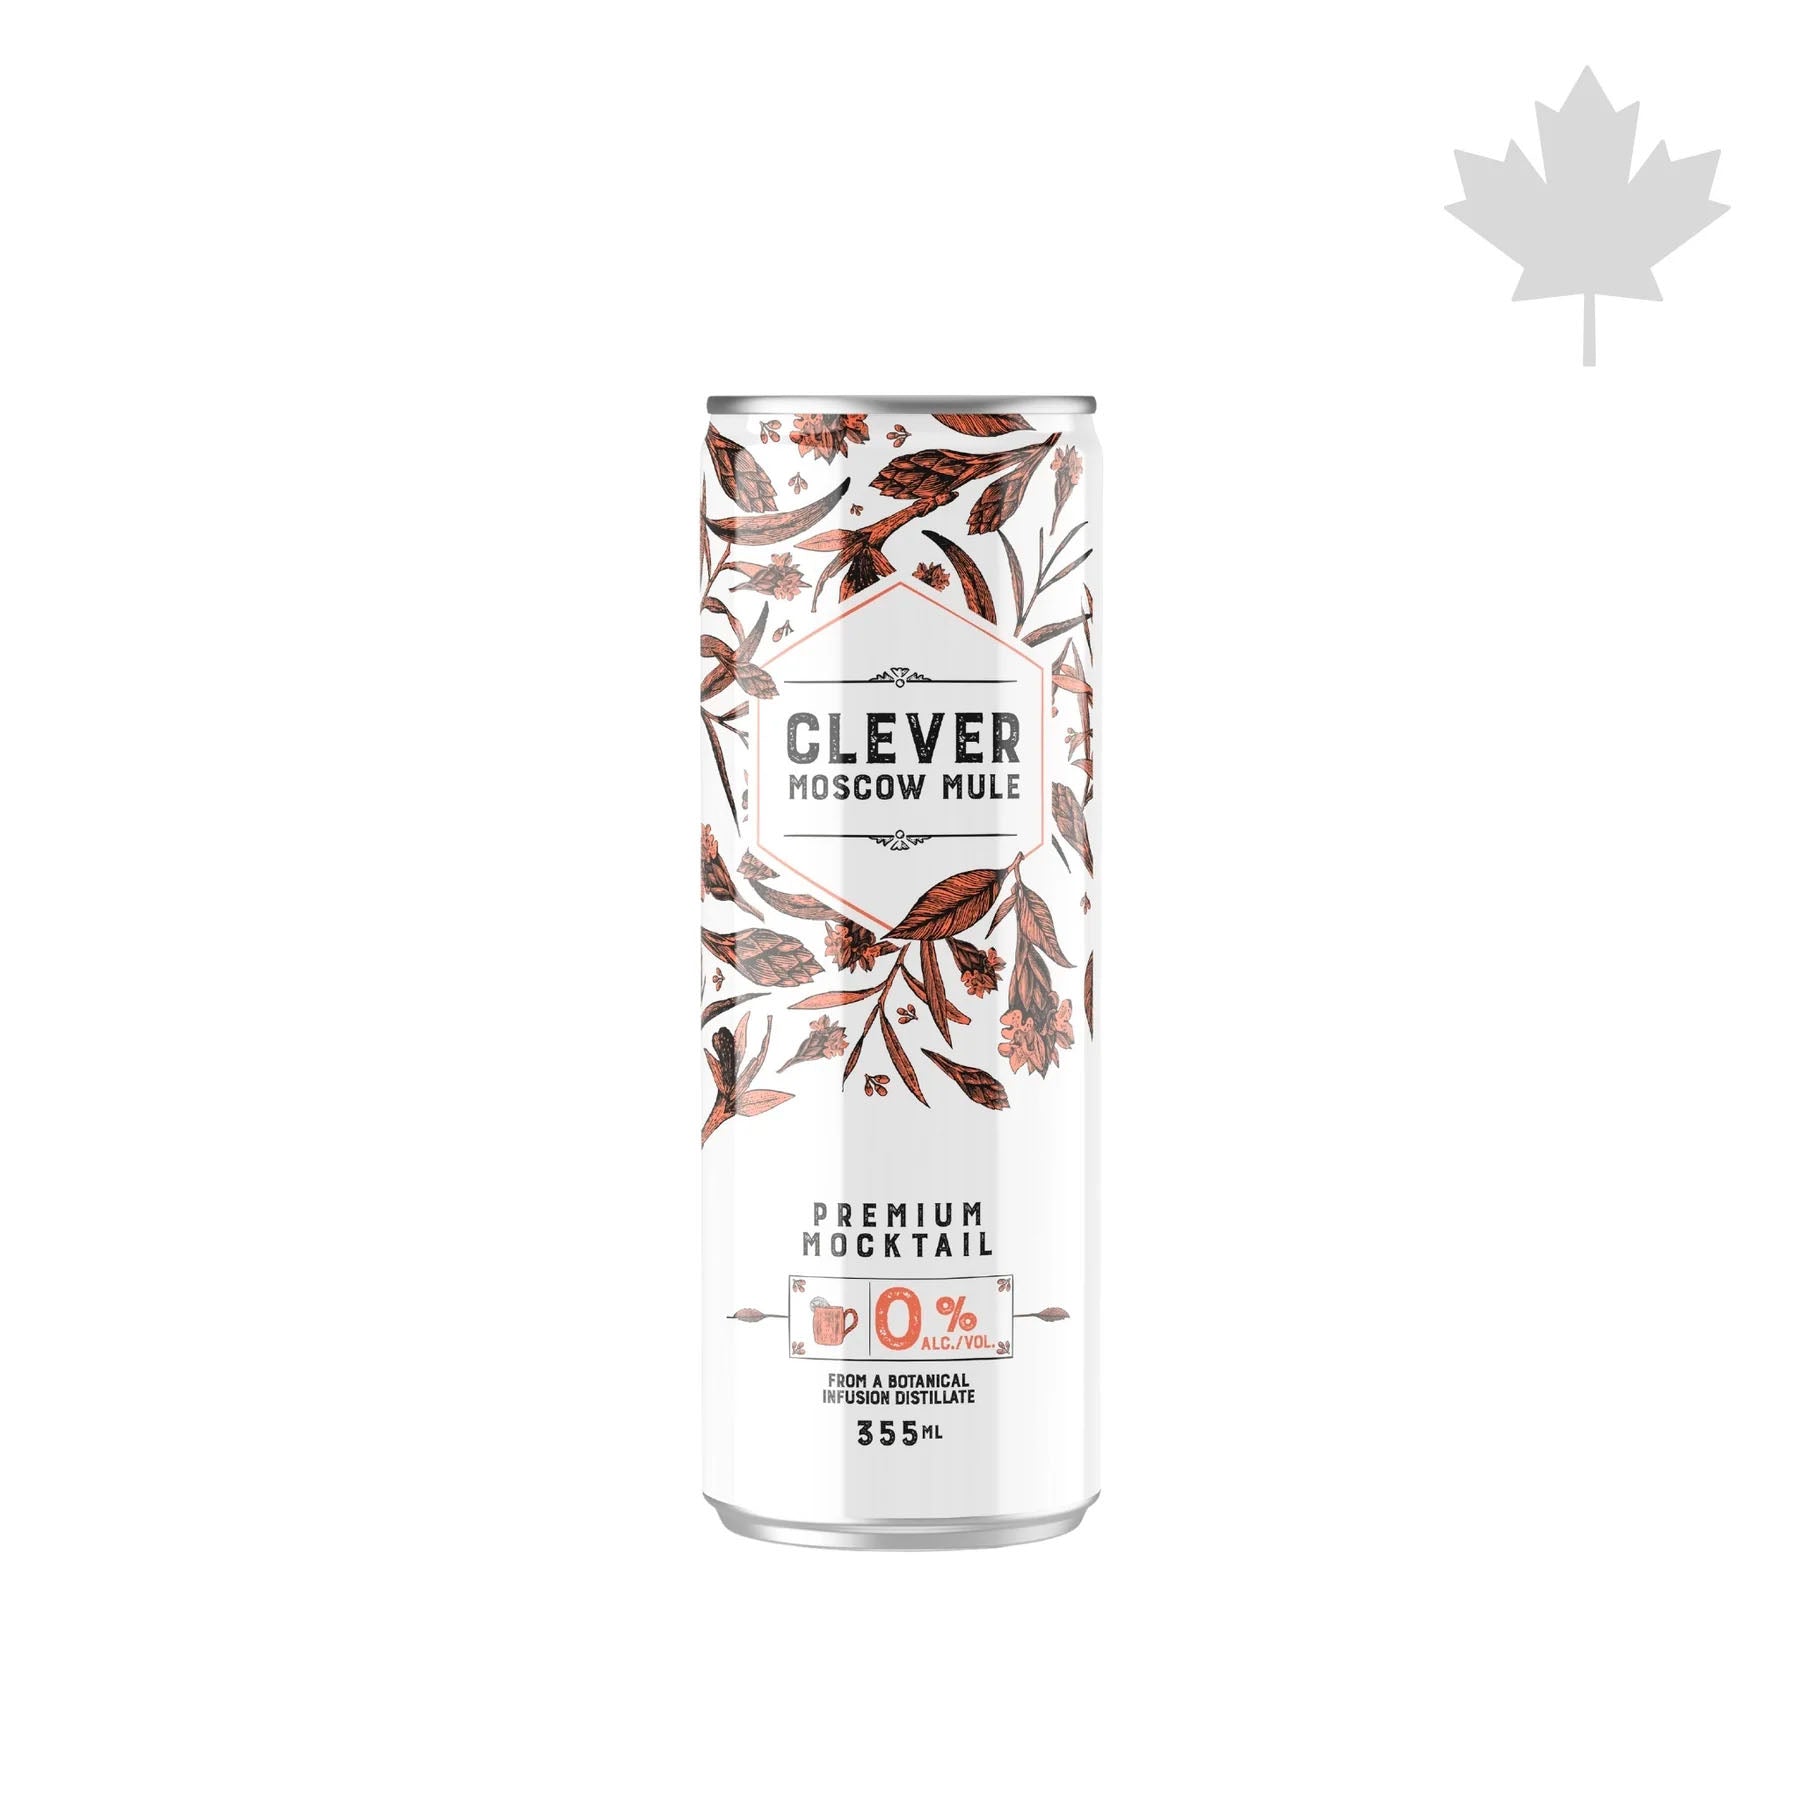 Clever Moscow Mule 12x355 ml